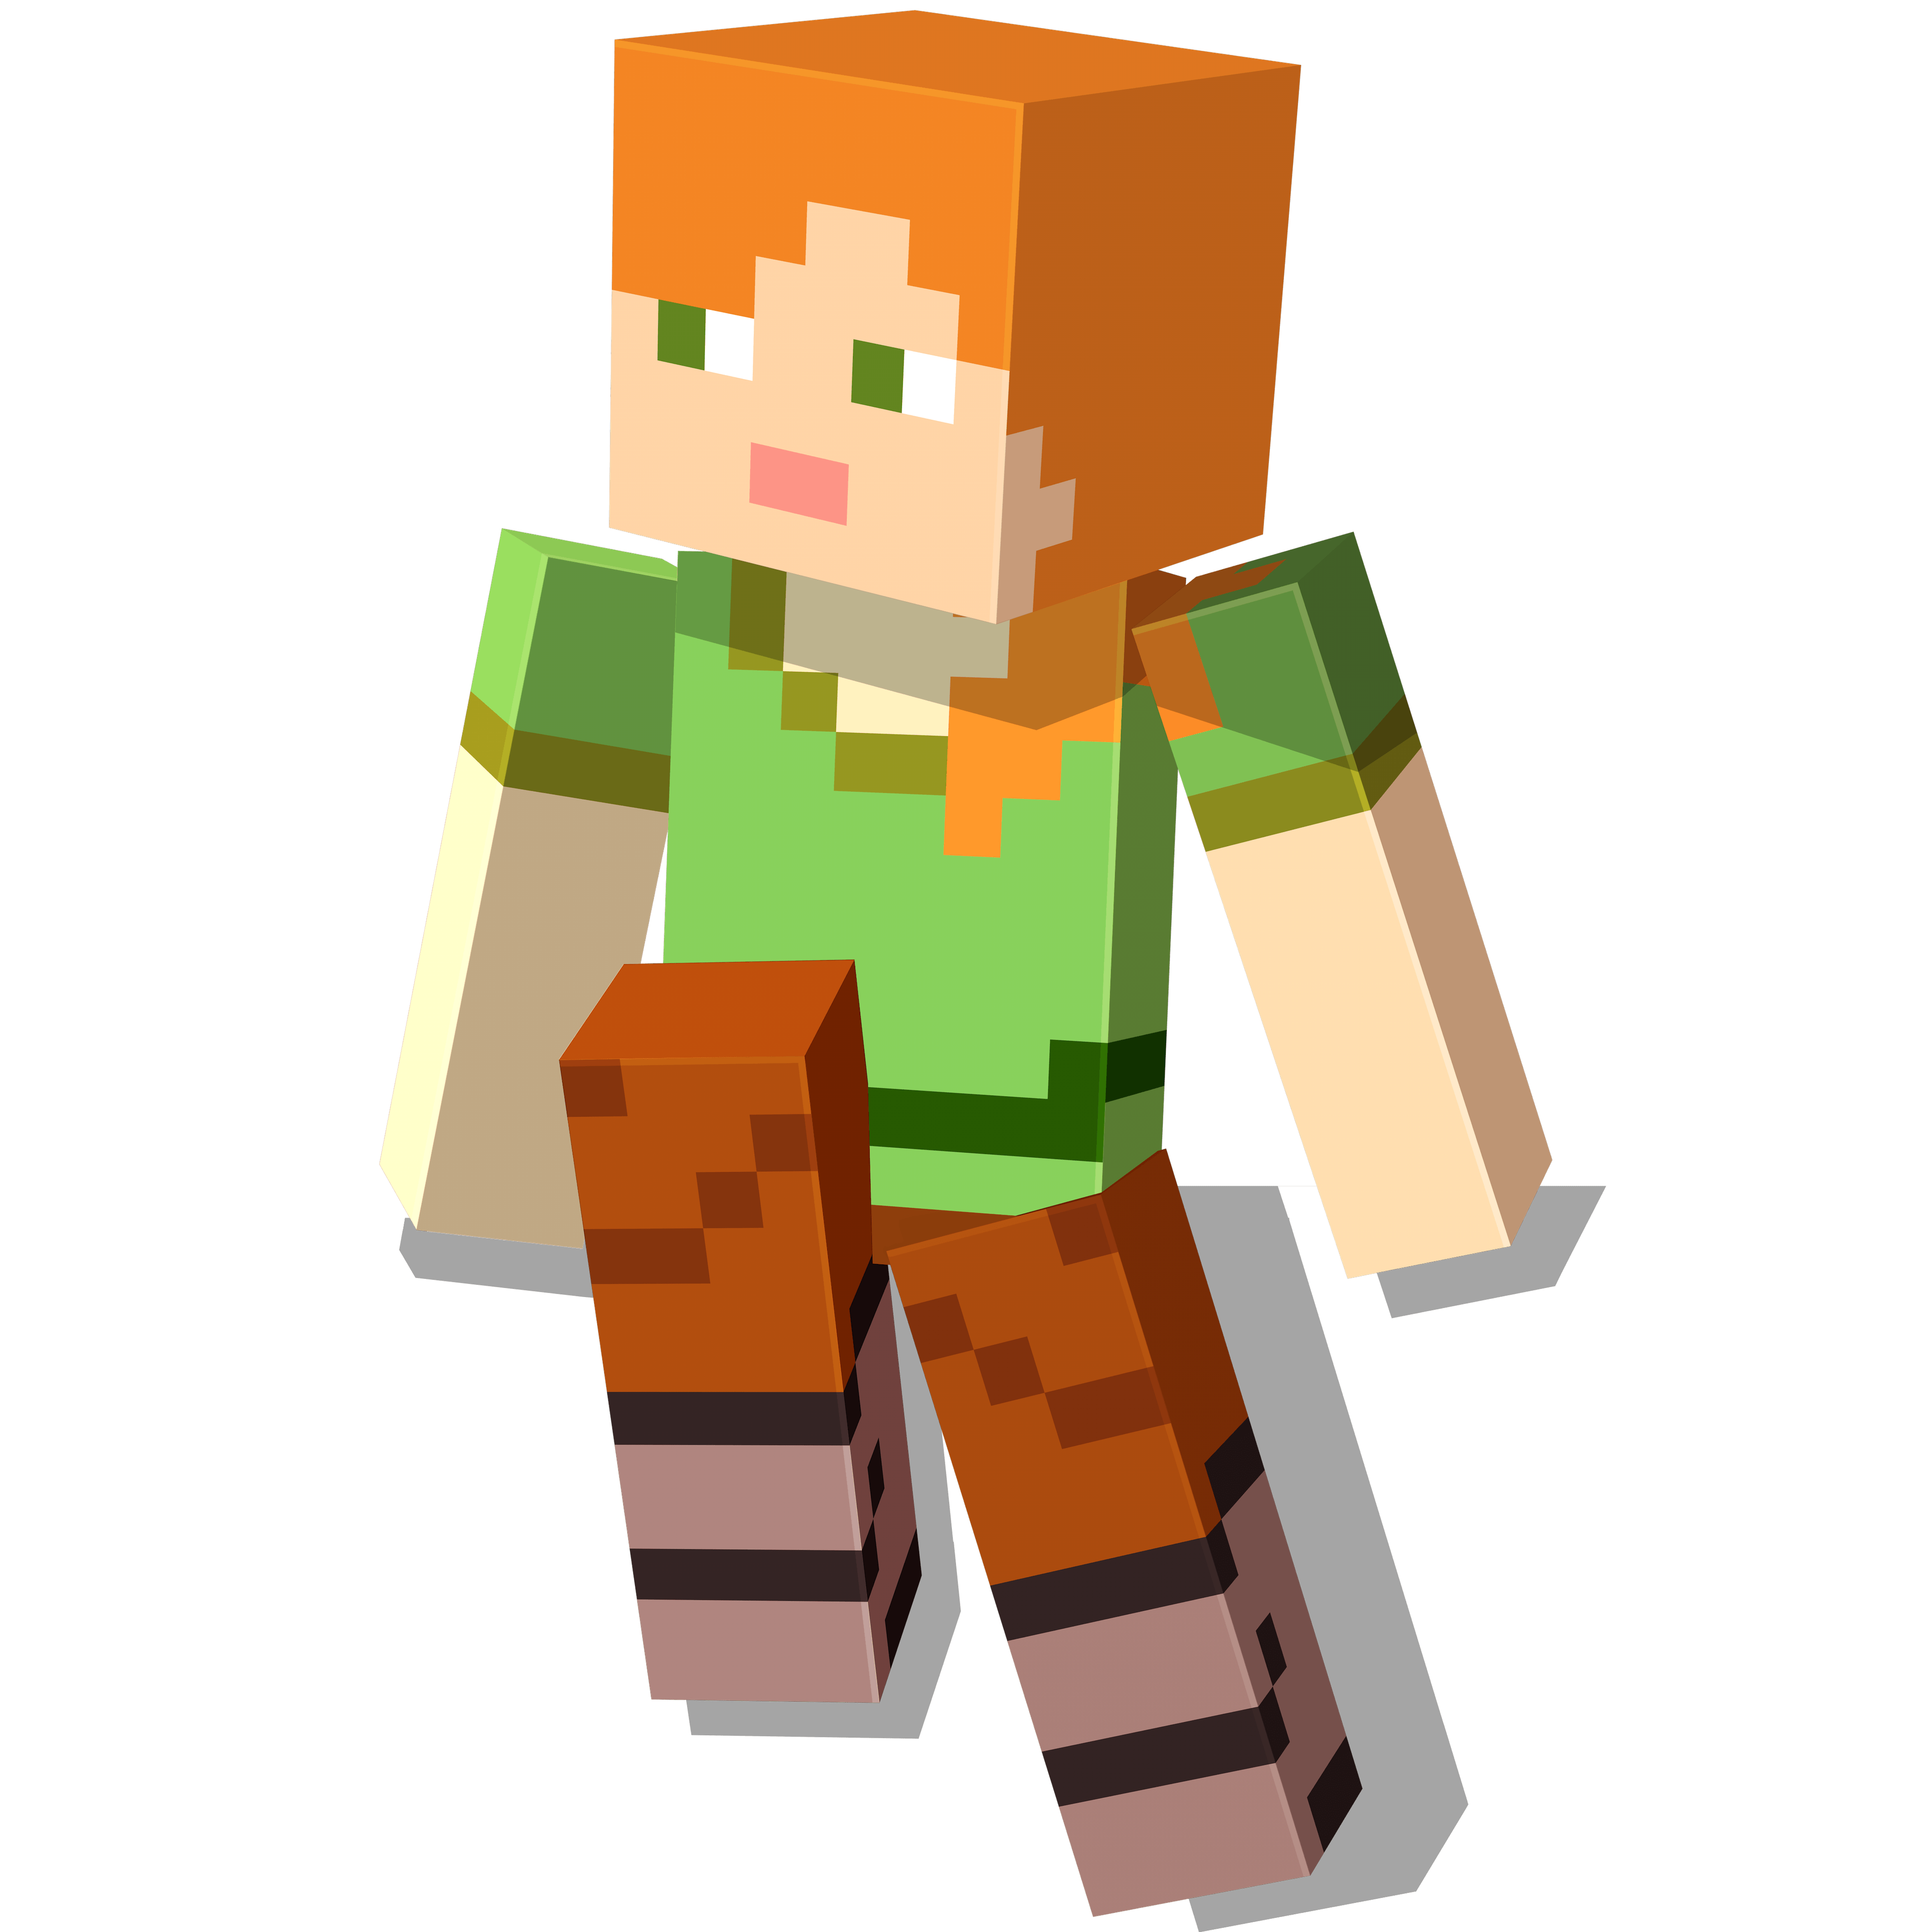 A Minecraft character with the default Alex texture sits on top of a screenshot